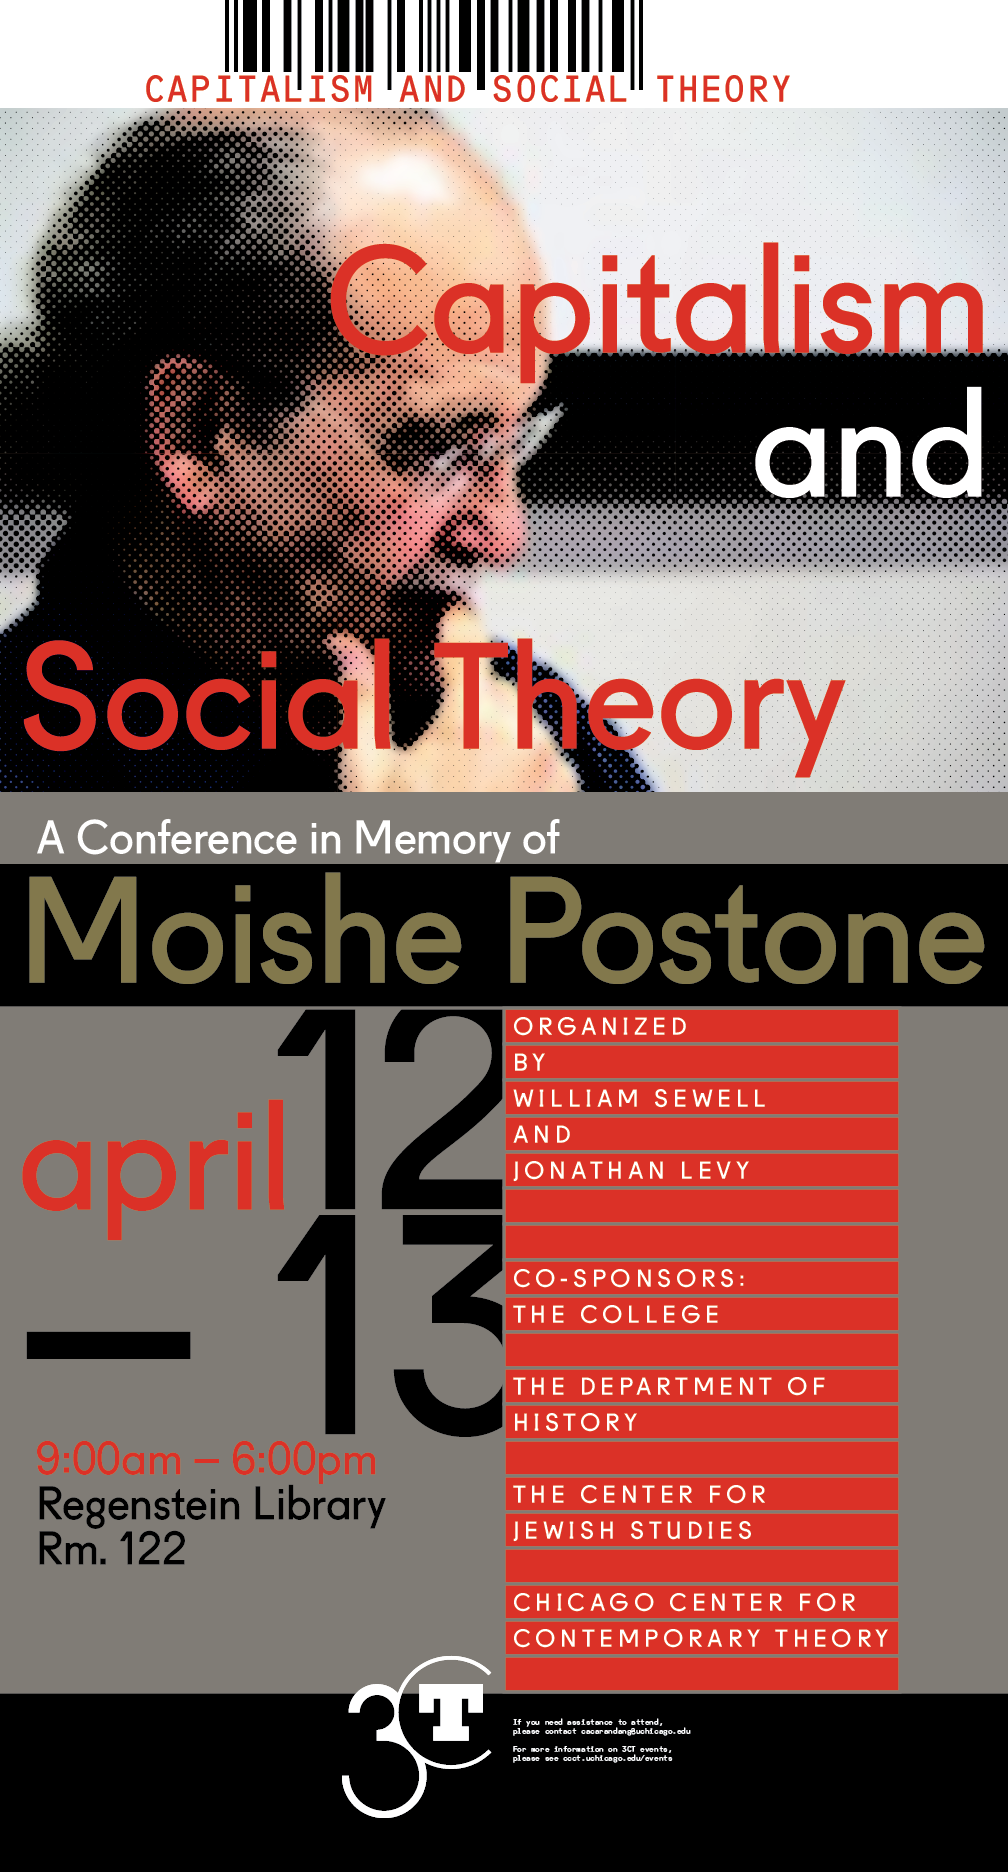 2019 Capitalism and Social Theory Conference in Memory of Moishe Postone poster